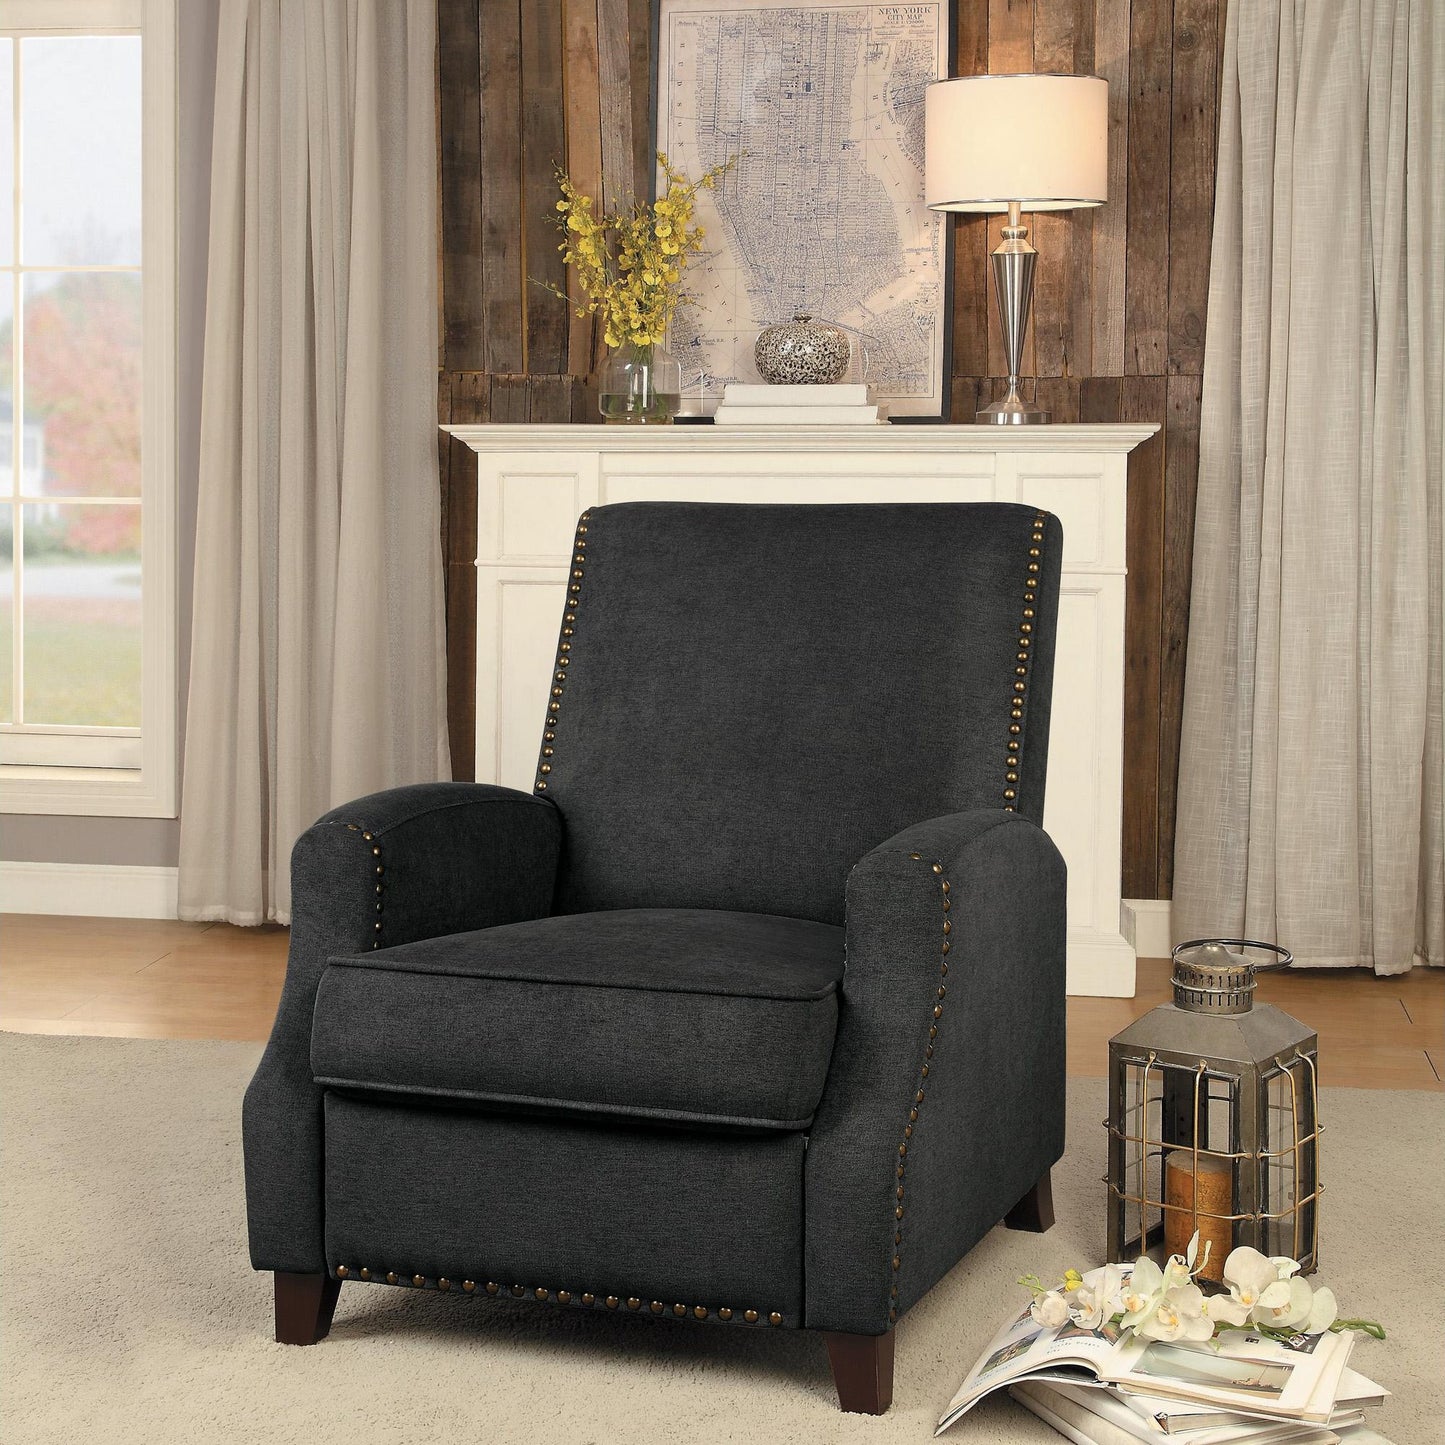 Homelegance Walden Push Back Recliner Chair in Grey Fabric